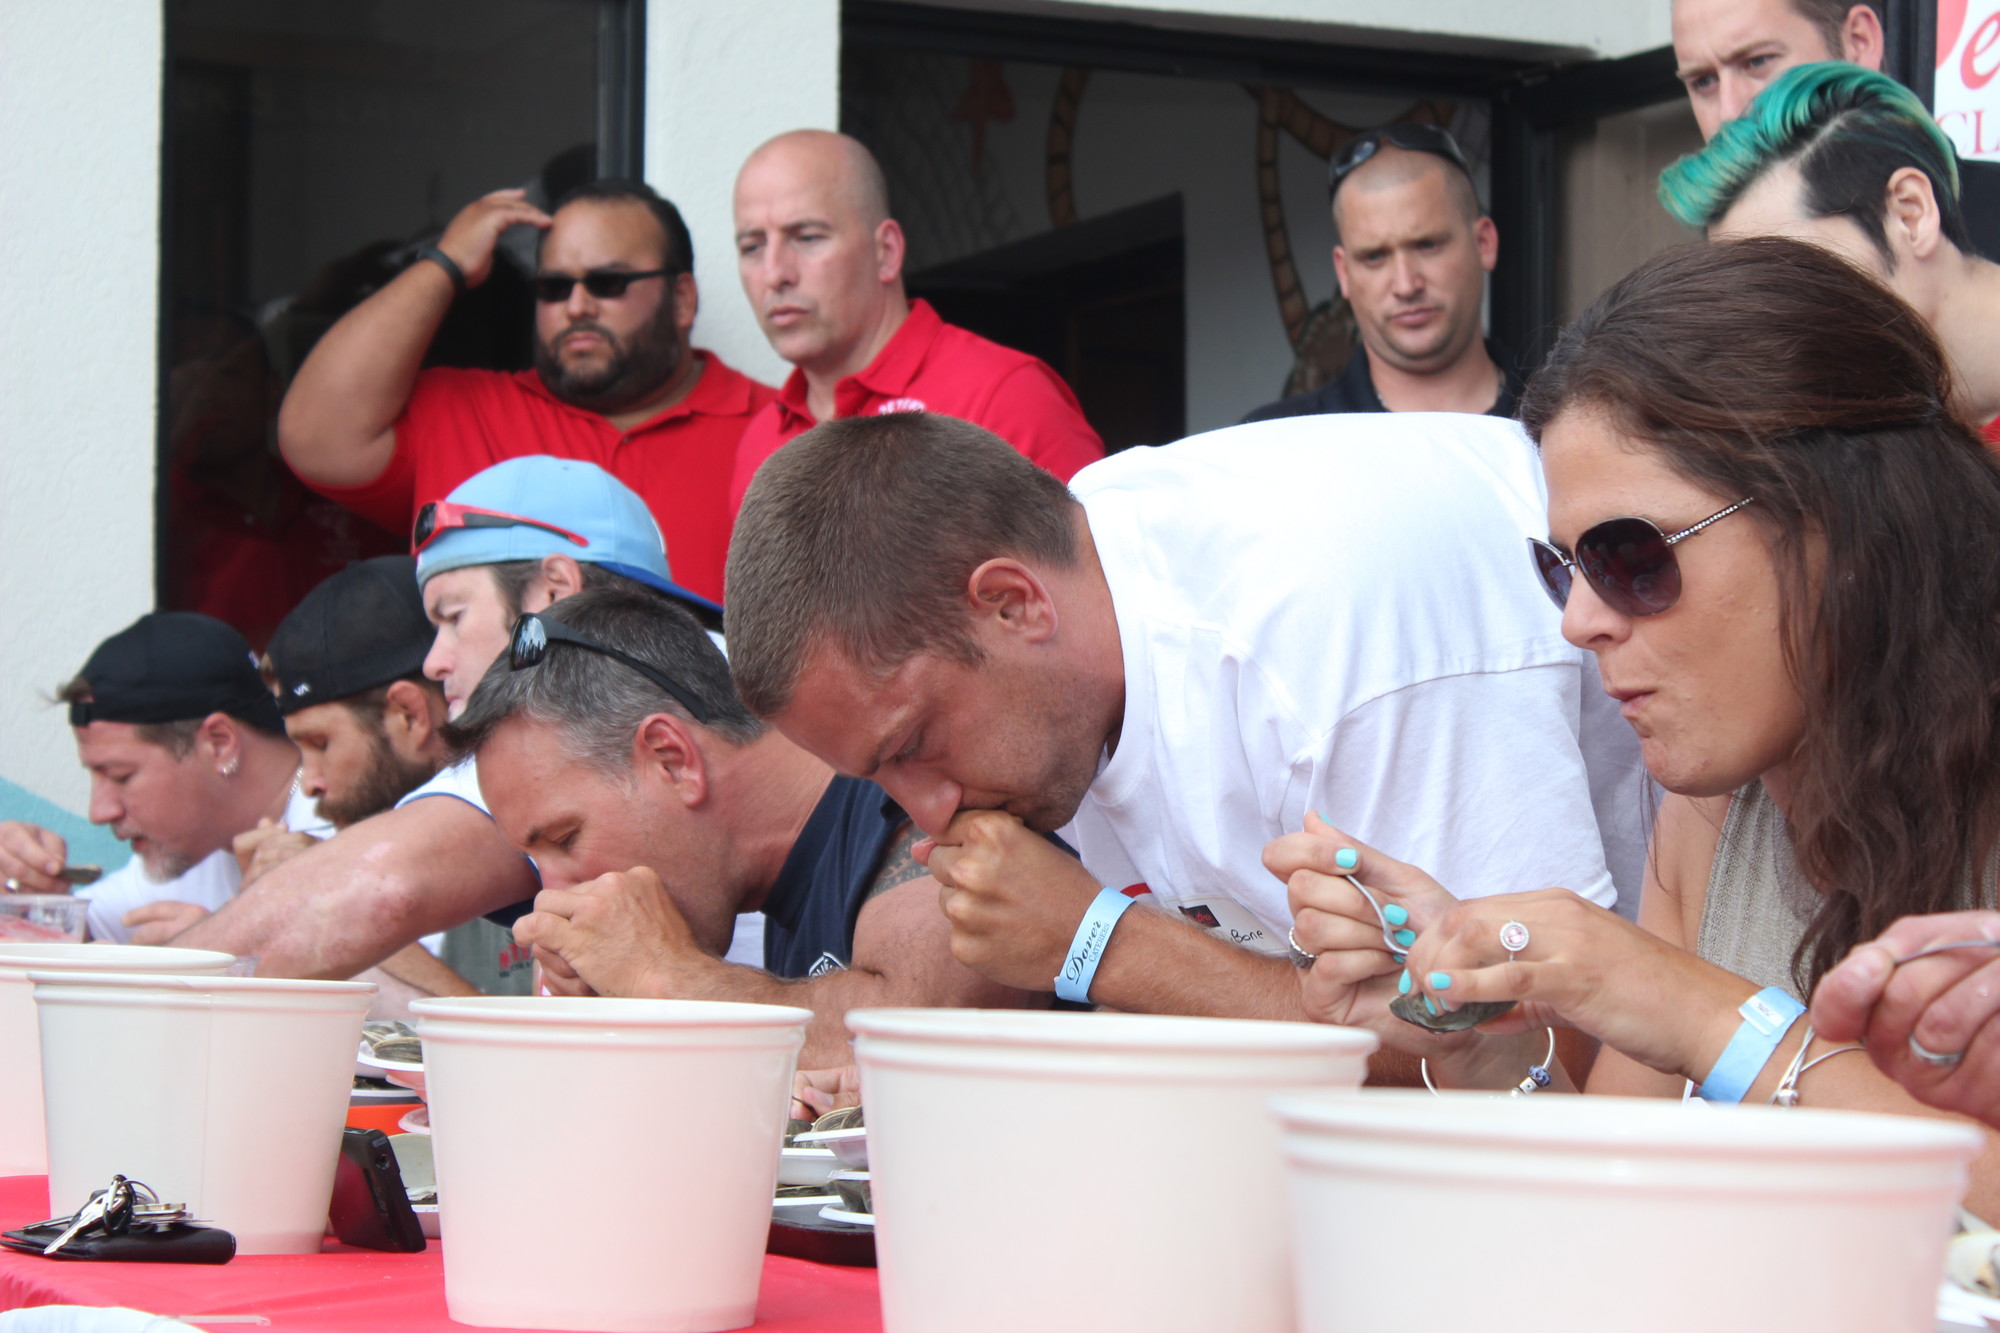 Contestants from all over Nassau County came to take part in Peter’s Clam Bar clam-eating competition. The contest benefitted Nassau firehouses.